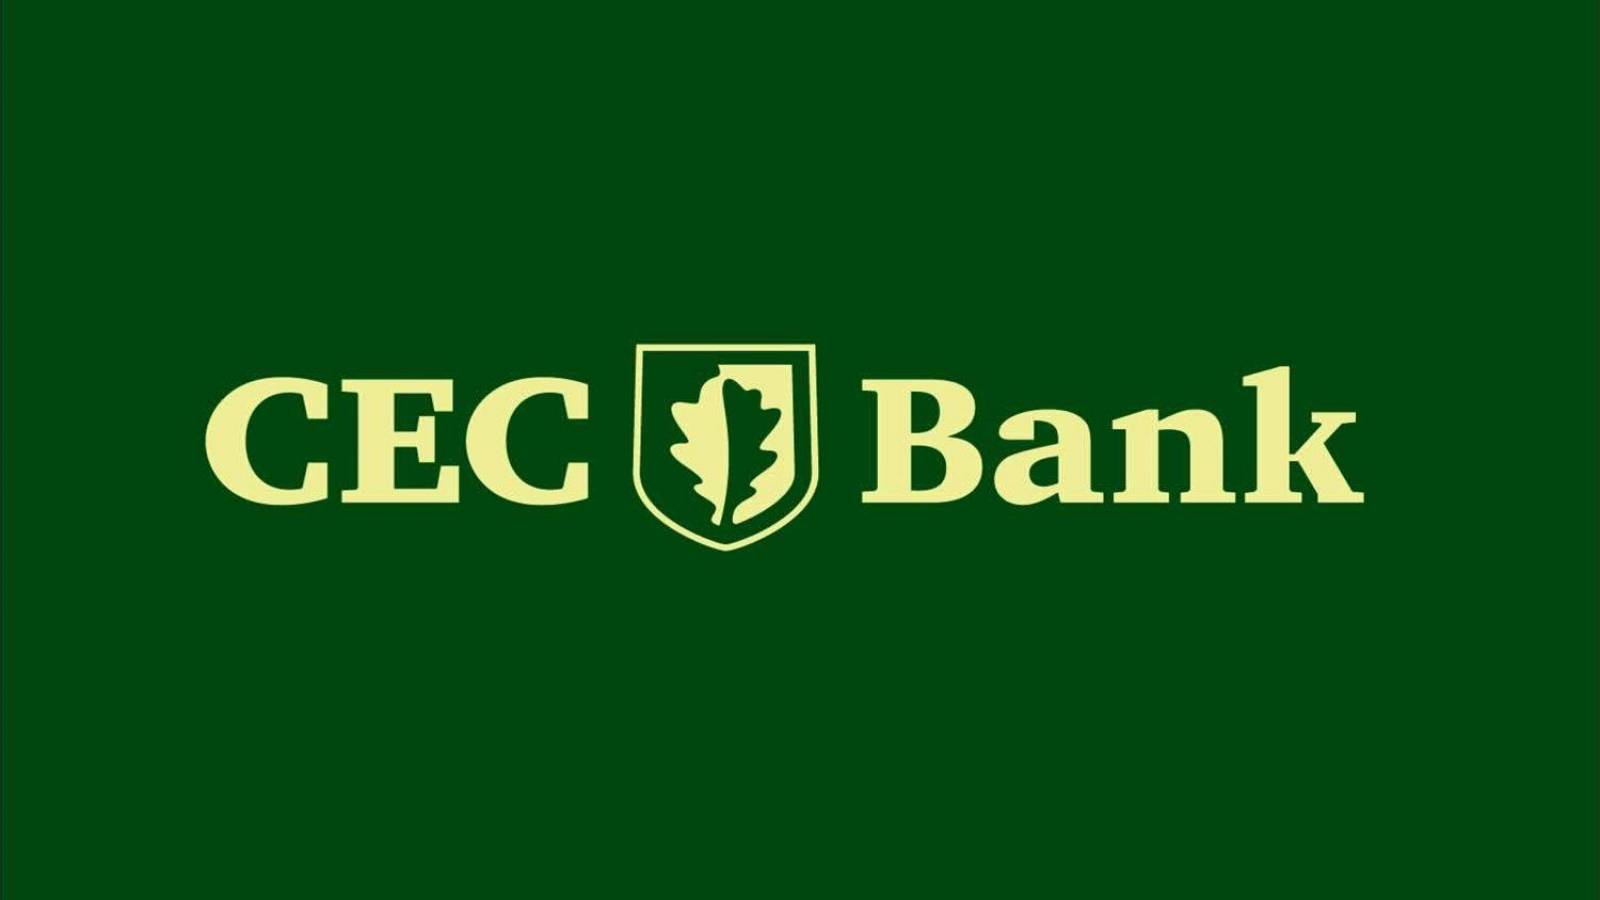 CEC Bank cheated